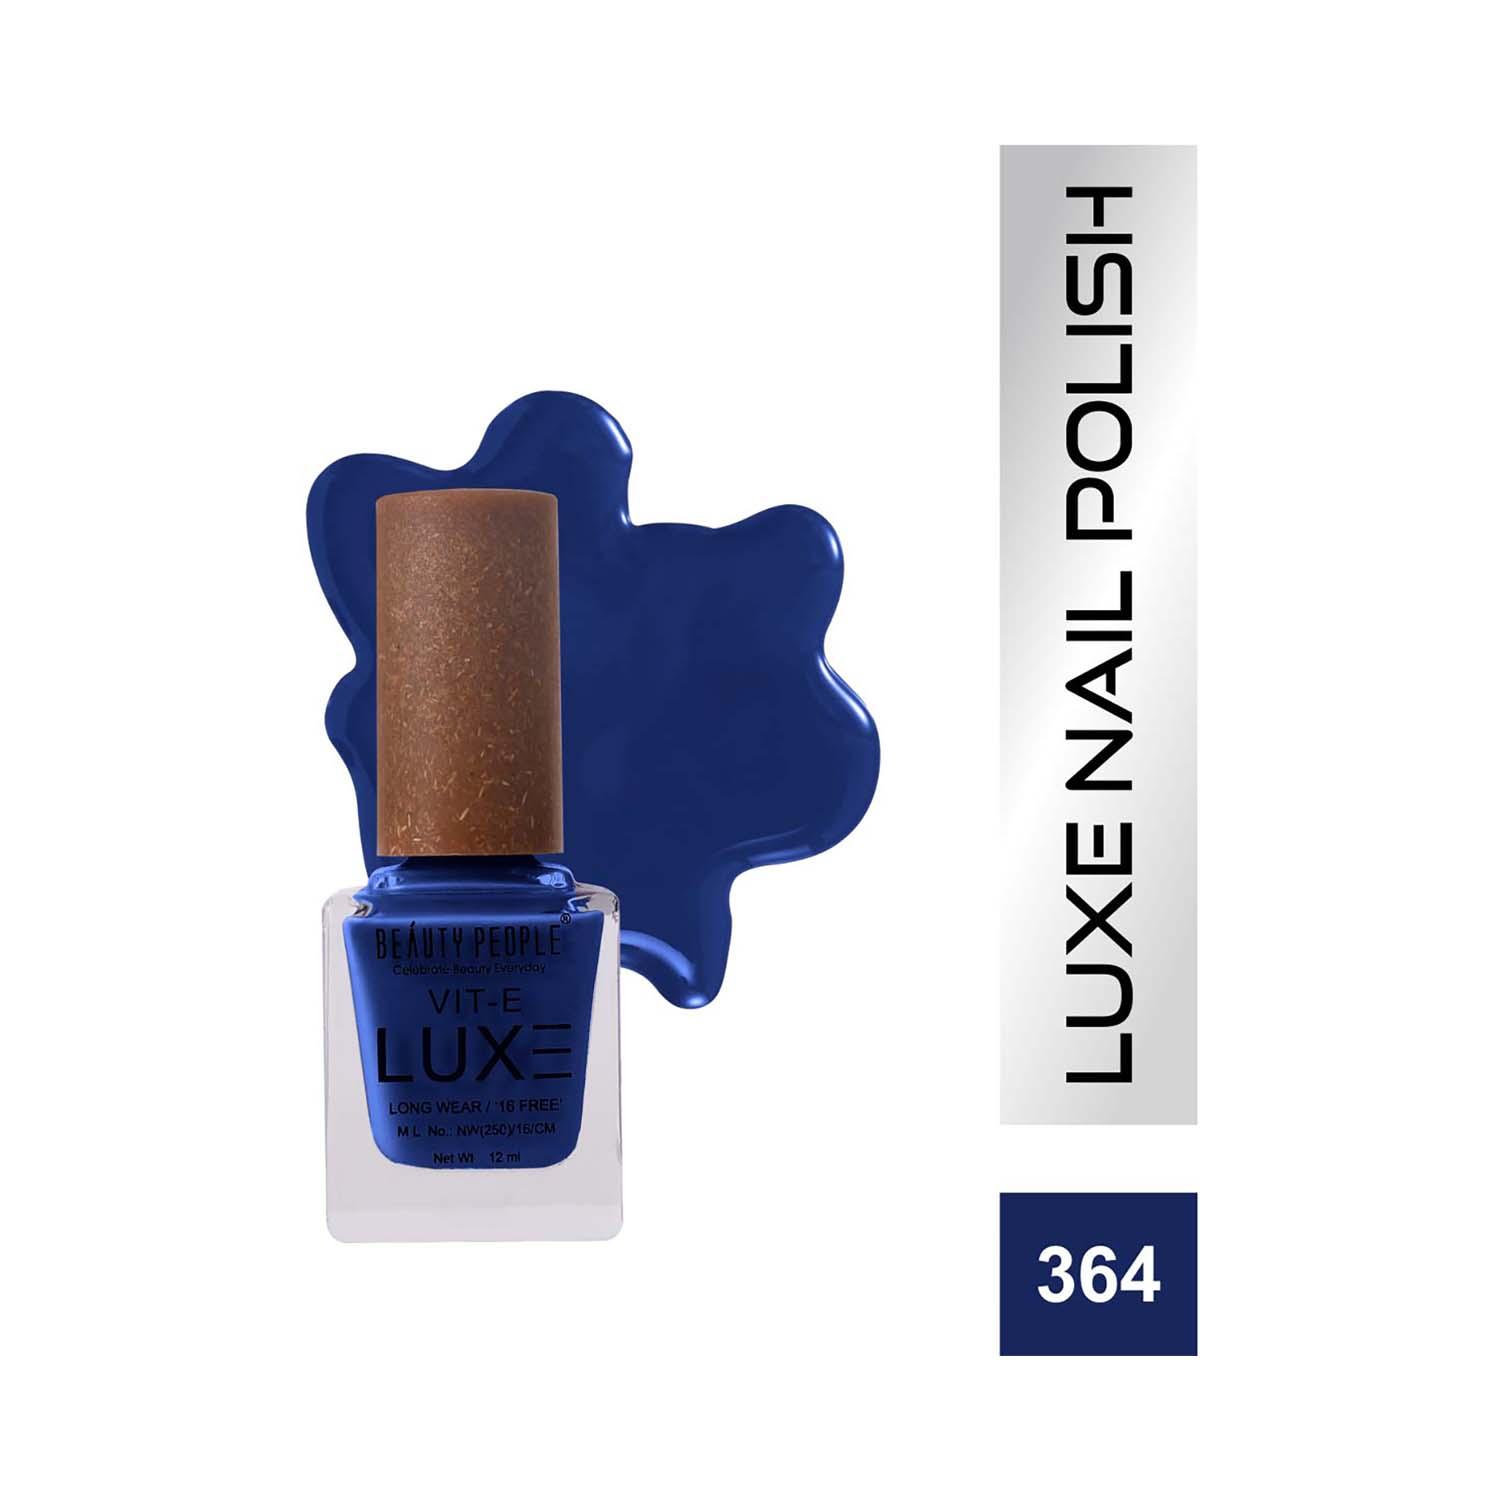 Beauty People | Beauty People Luxe Nail Polish with Vitamin E - 364 Blue Bliss (12ml)